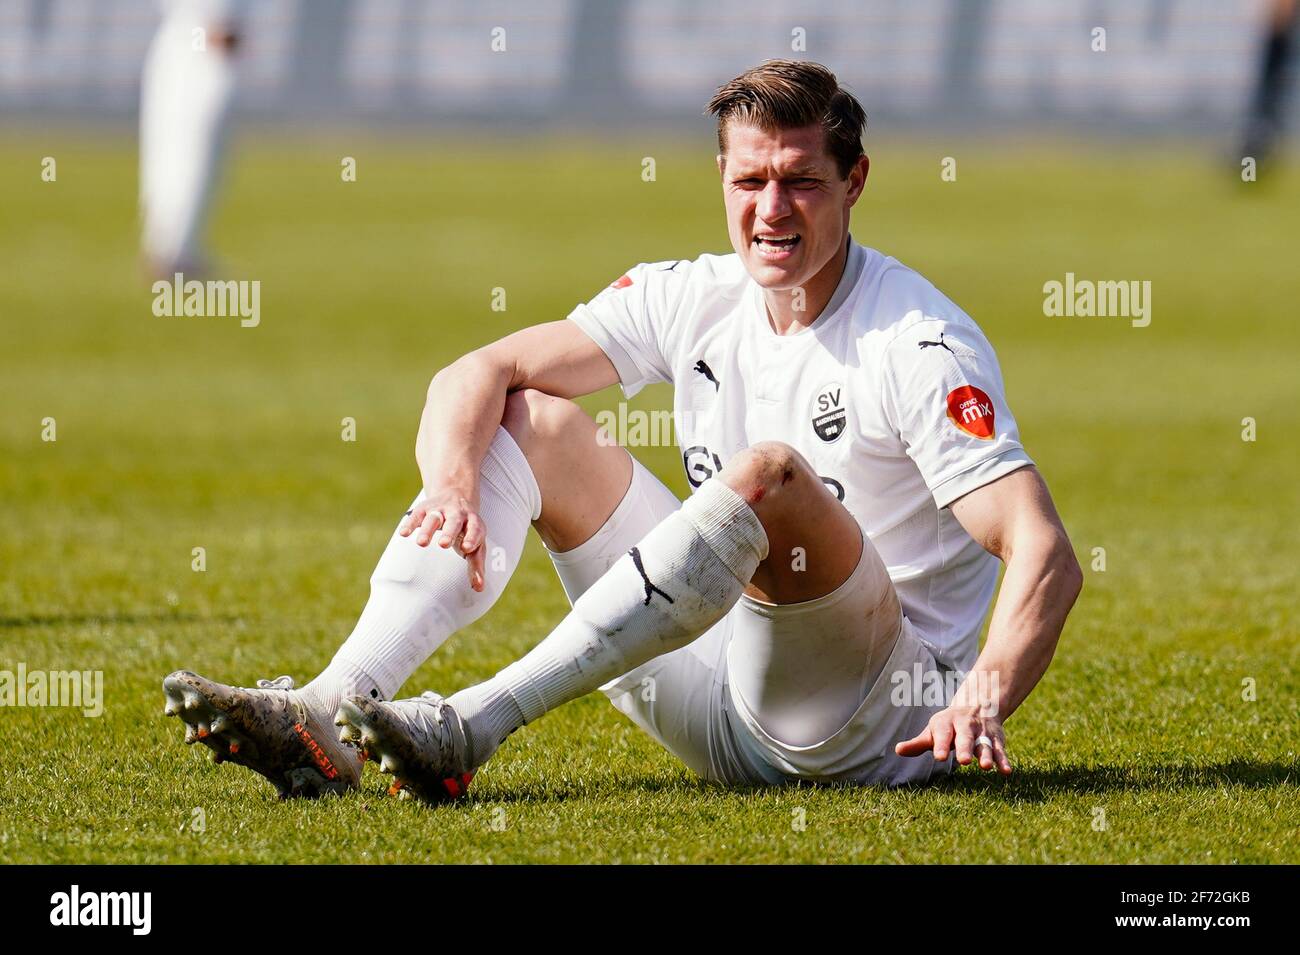 Sandhausen, Germany. 04th Apr, 2021. Football: 2nd Bundesliga, SV Sandhausen - Würzburger Kickers, Matchday 27, Hardtwaldstadion. Sandhausen's Kevin Behrens is on the pitch. Credit: Uwe Anspach/dpa - IMPORTANT NOTE: In accordance with the regulations of the DFL Deutsche Fußball Liga and/or the DFB Deutscher Fußball-Bund, it is prohibited to use or have used photographs taken in the stadium and/or of the match in the form of sequence pictures and/or video-like photo series./dpa/Alamy Live News Stock Photo